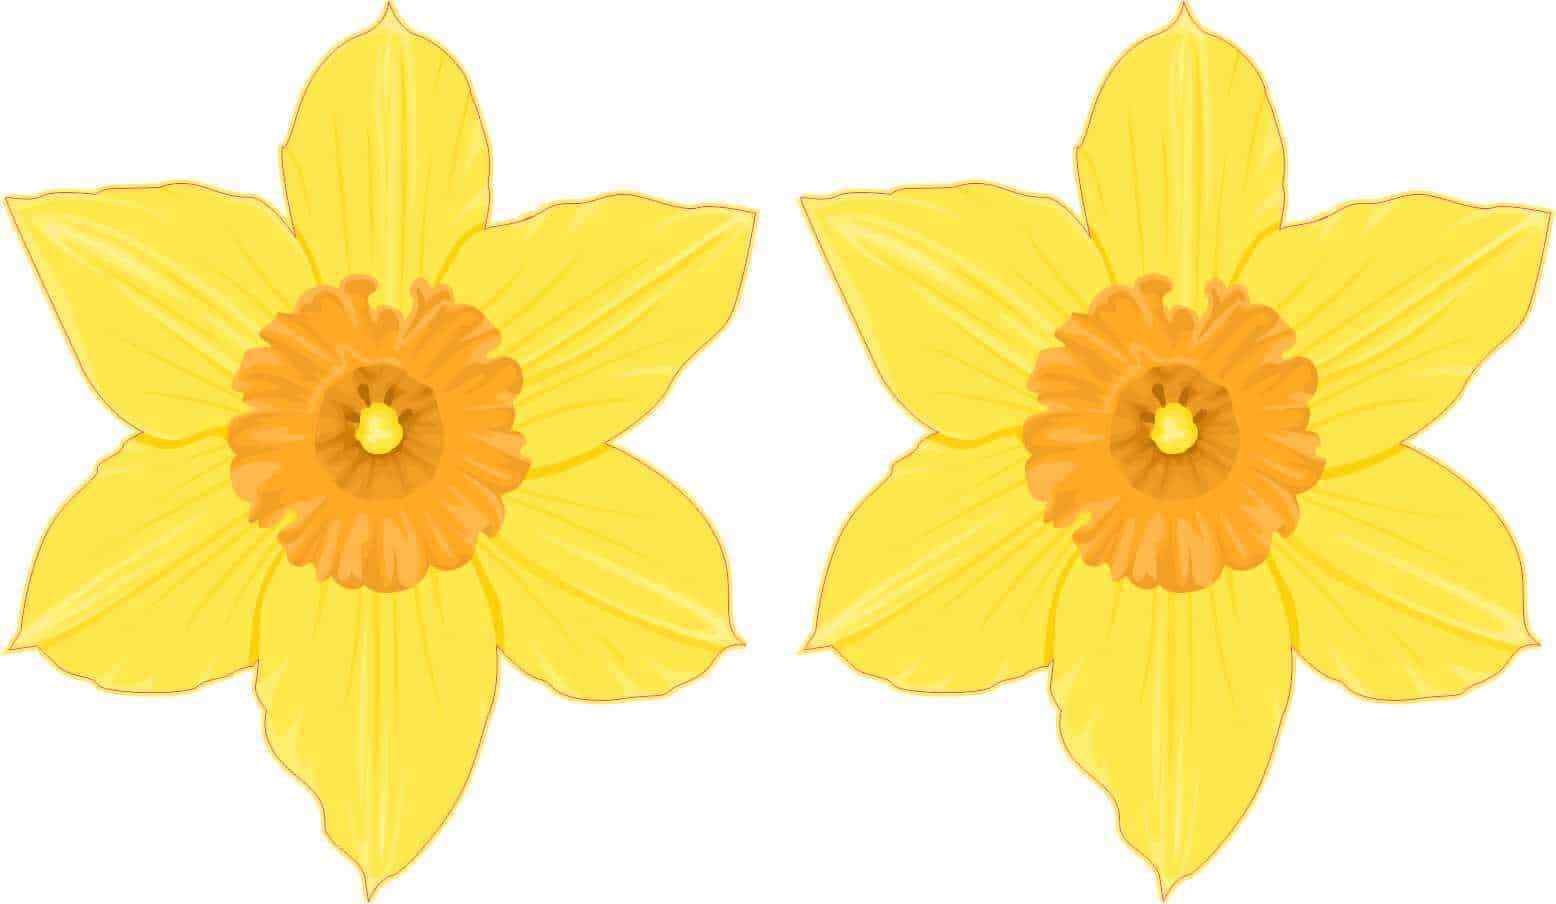 2.5in x 3in Yellow Daffodil Vinyl Stickers Car Truck Vehicle Bumper Decals